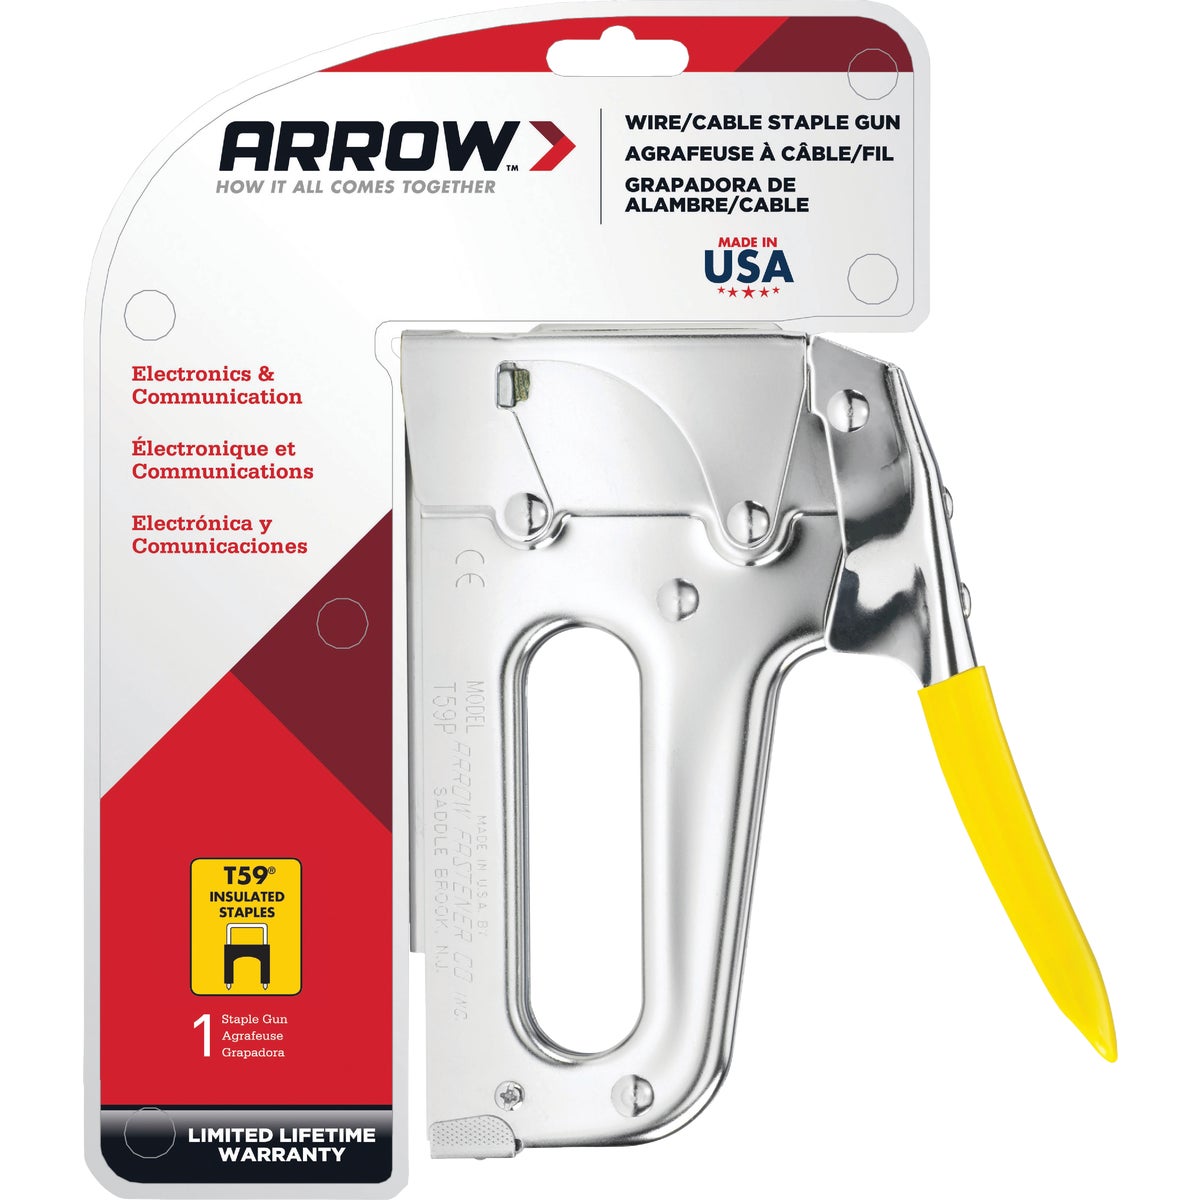 Arrow T59 Insulated Wire and Cable Staple Gun